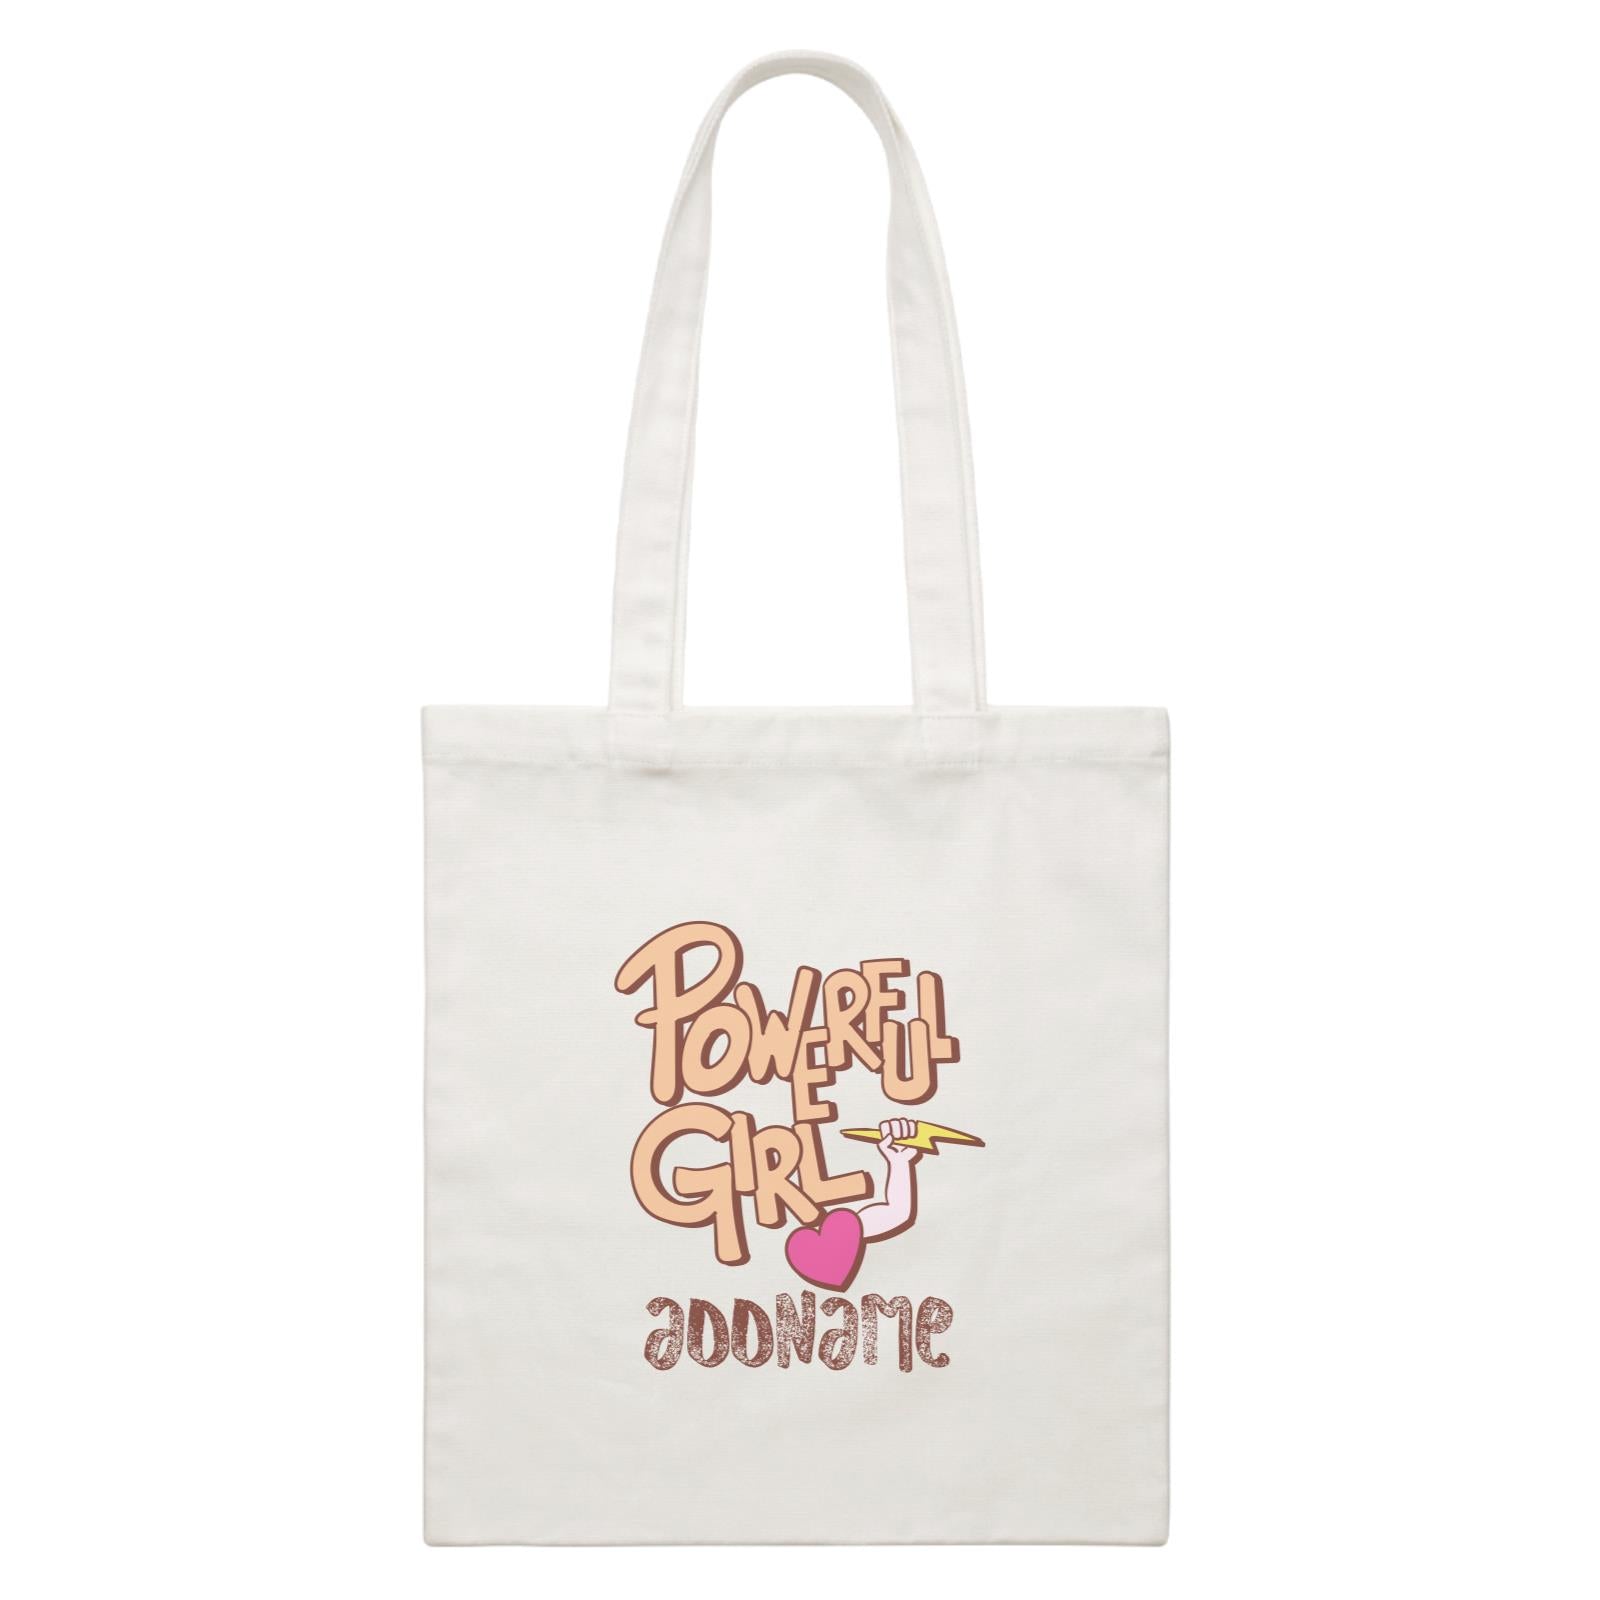 Cool Cute Words Powerful Girl Heart Hold Lightning Addname White Canvas Bag